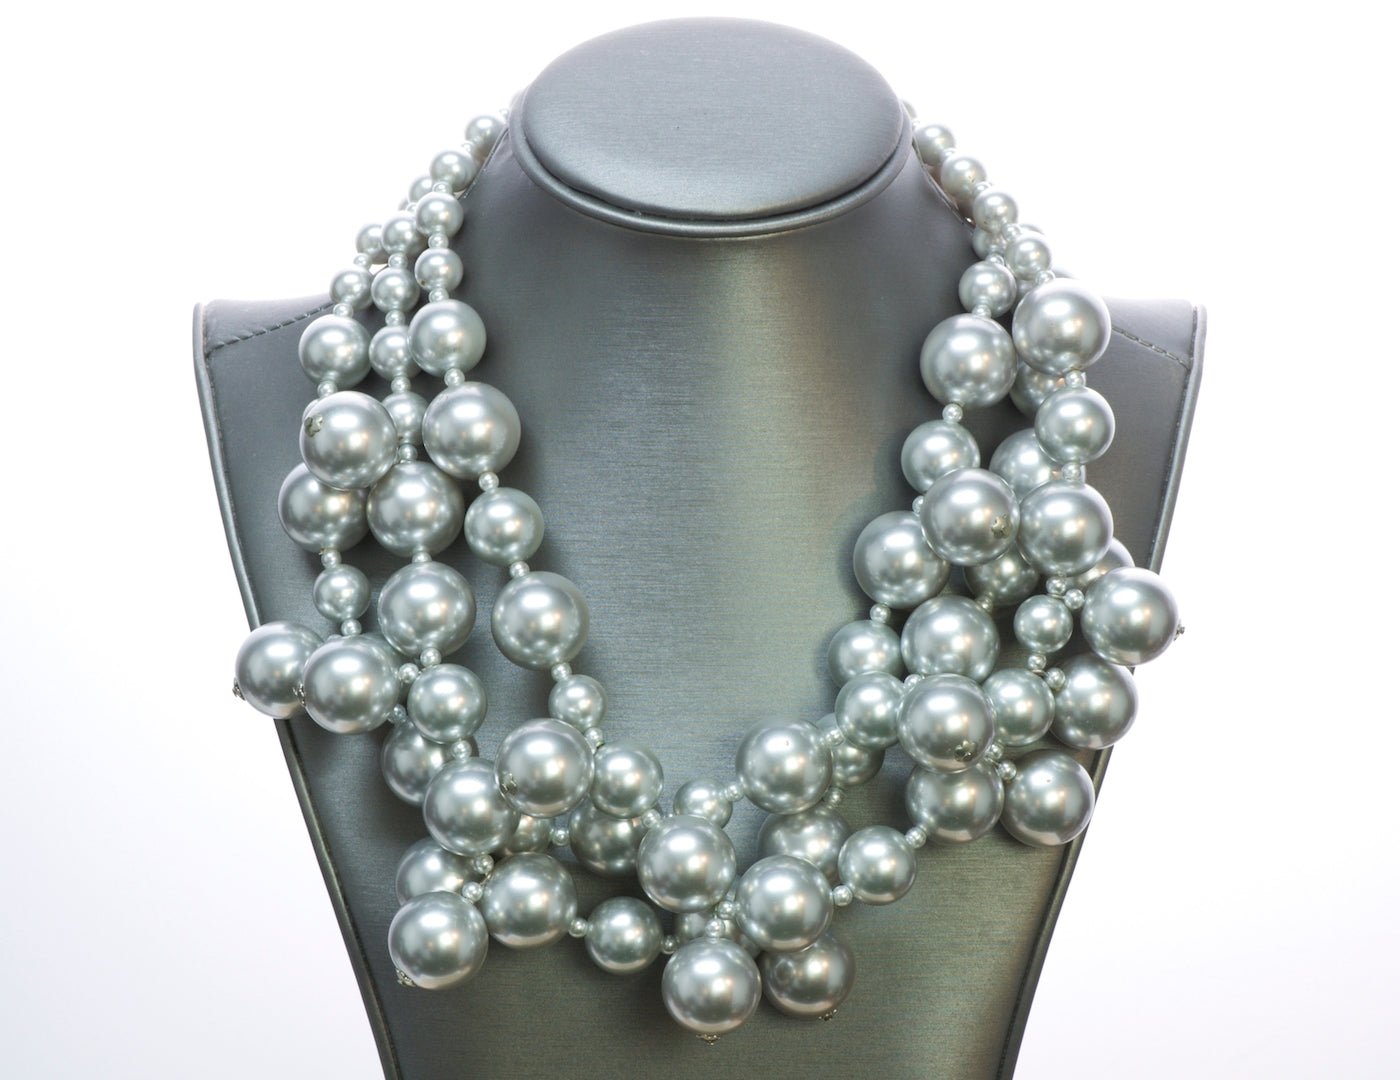 Kenneth Jay Lane Silver Tone Bead Necklace